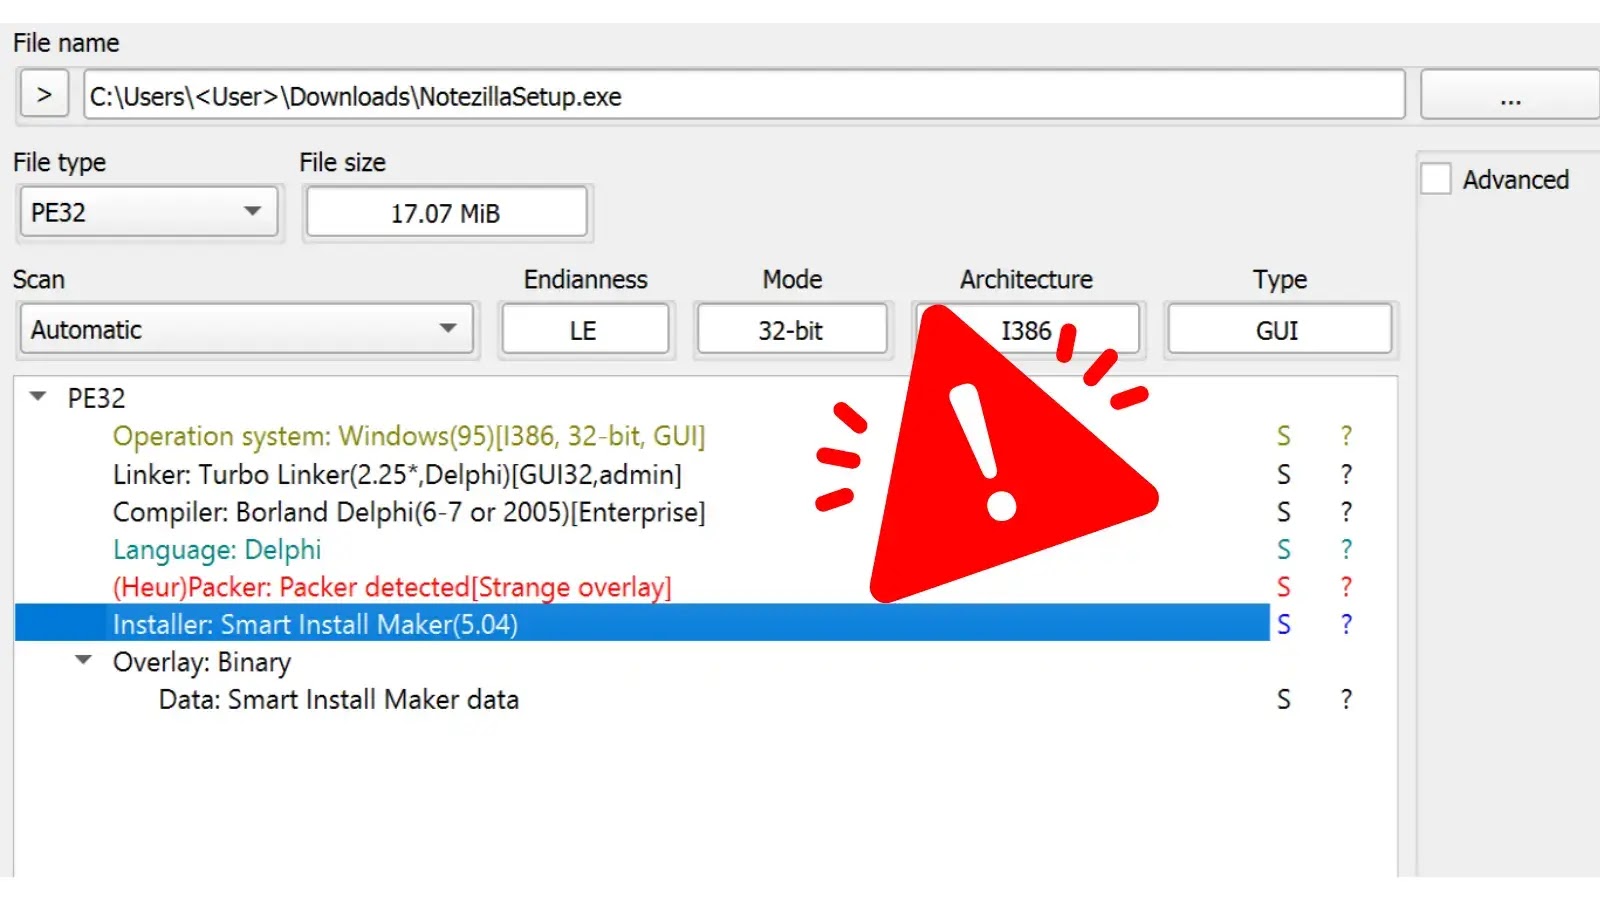 Beware of Weaponized Notezilla, RecentX, & Copywhiz Windows Tools that Deliver Stealing Malware